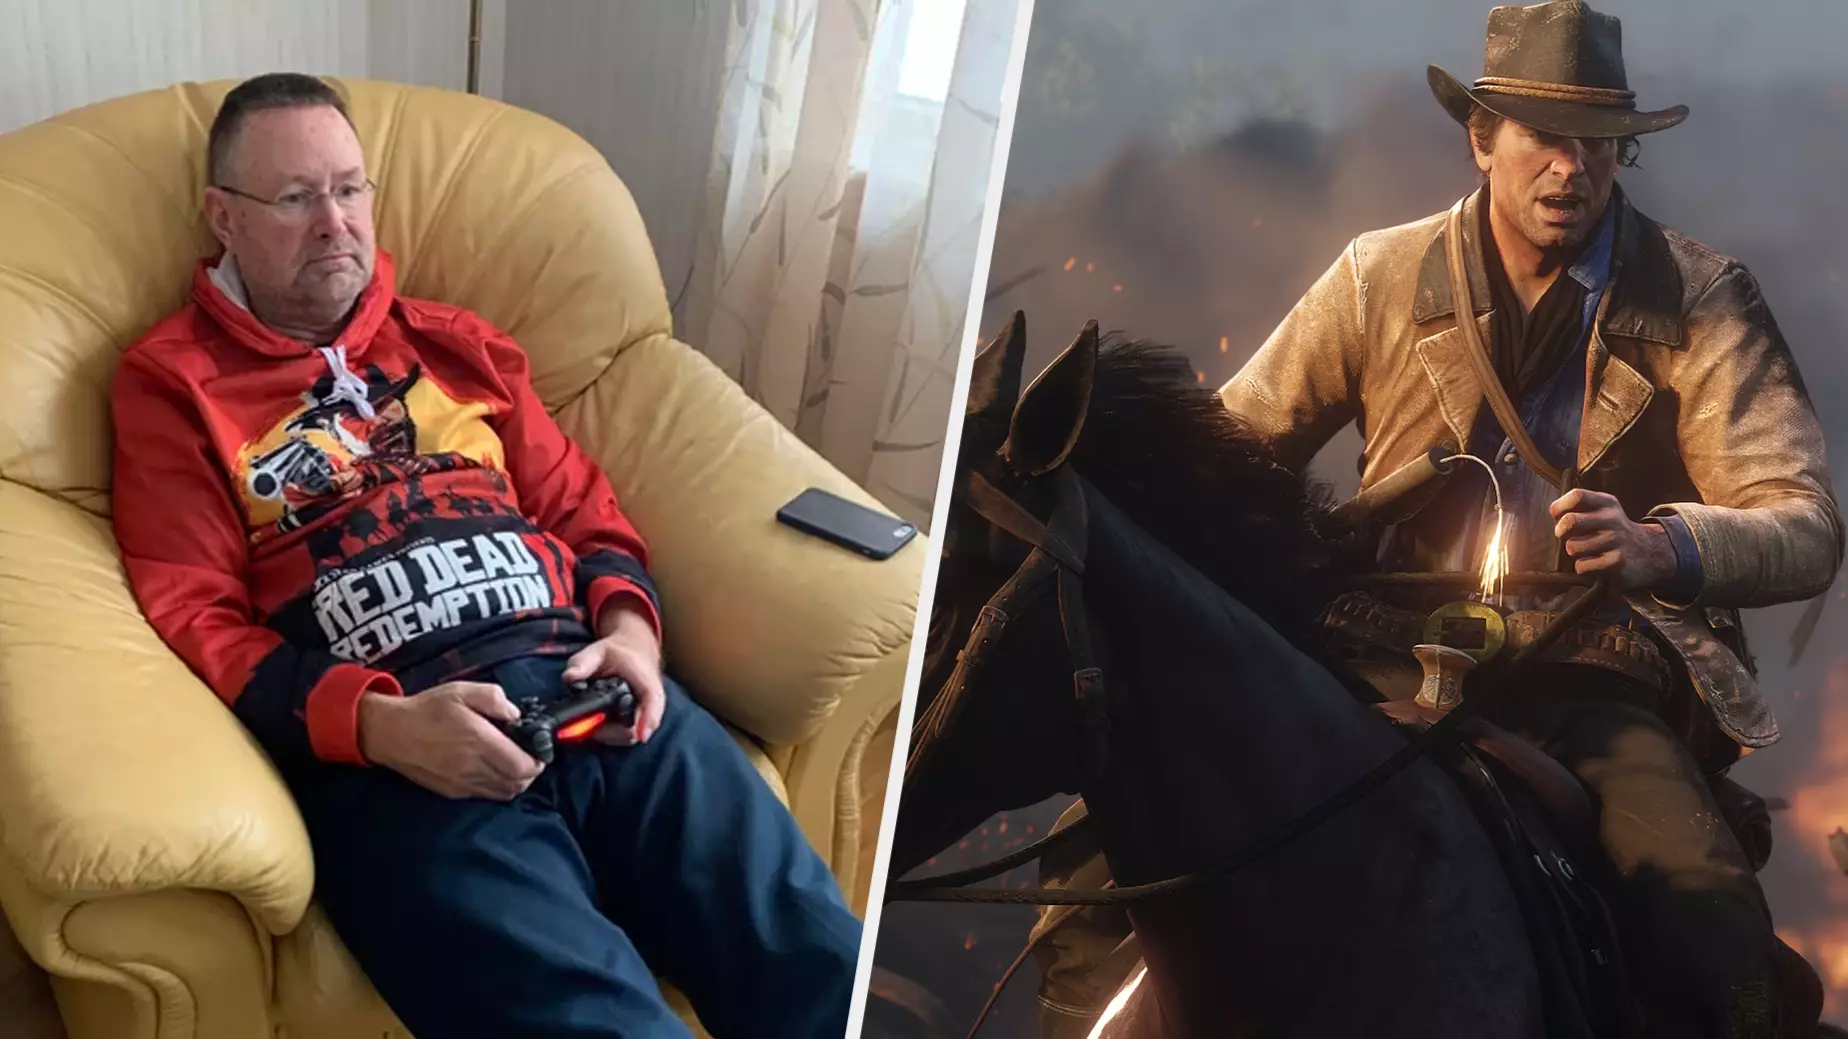 65-Year-Old 'Red Dead Redemption 2' Player Has Beaten Game More Than 30 Times